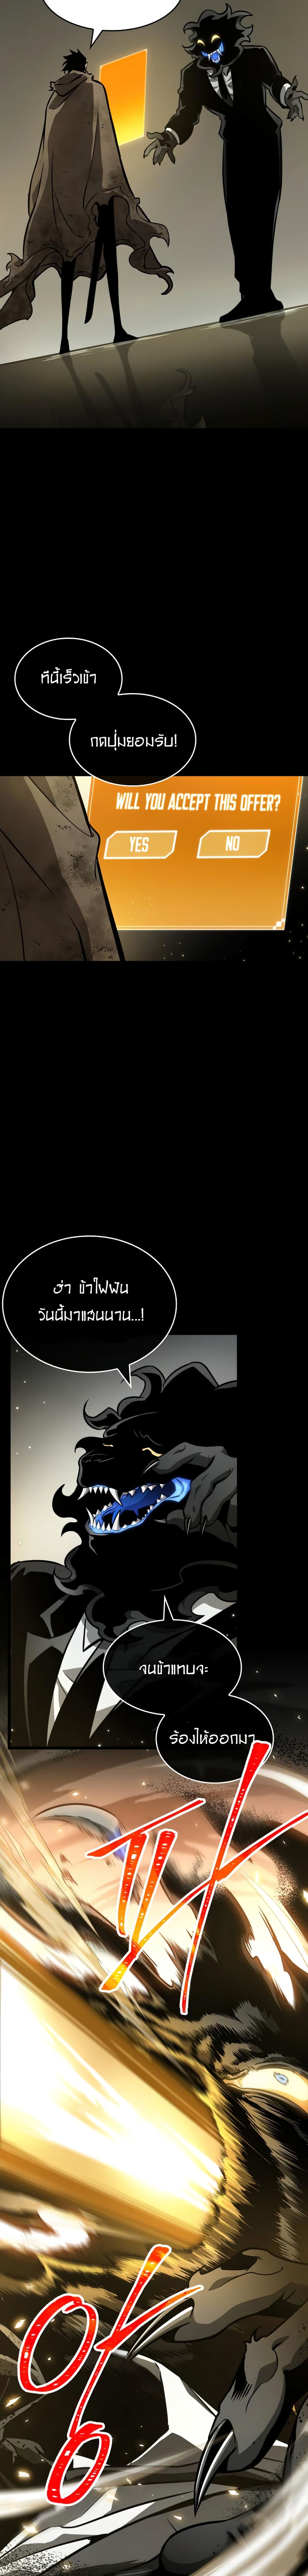 The World After The End 7 แปลไทย